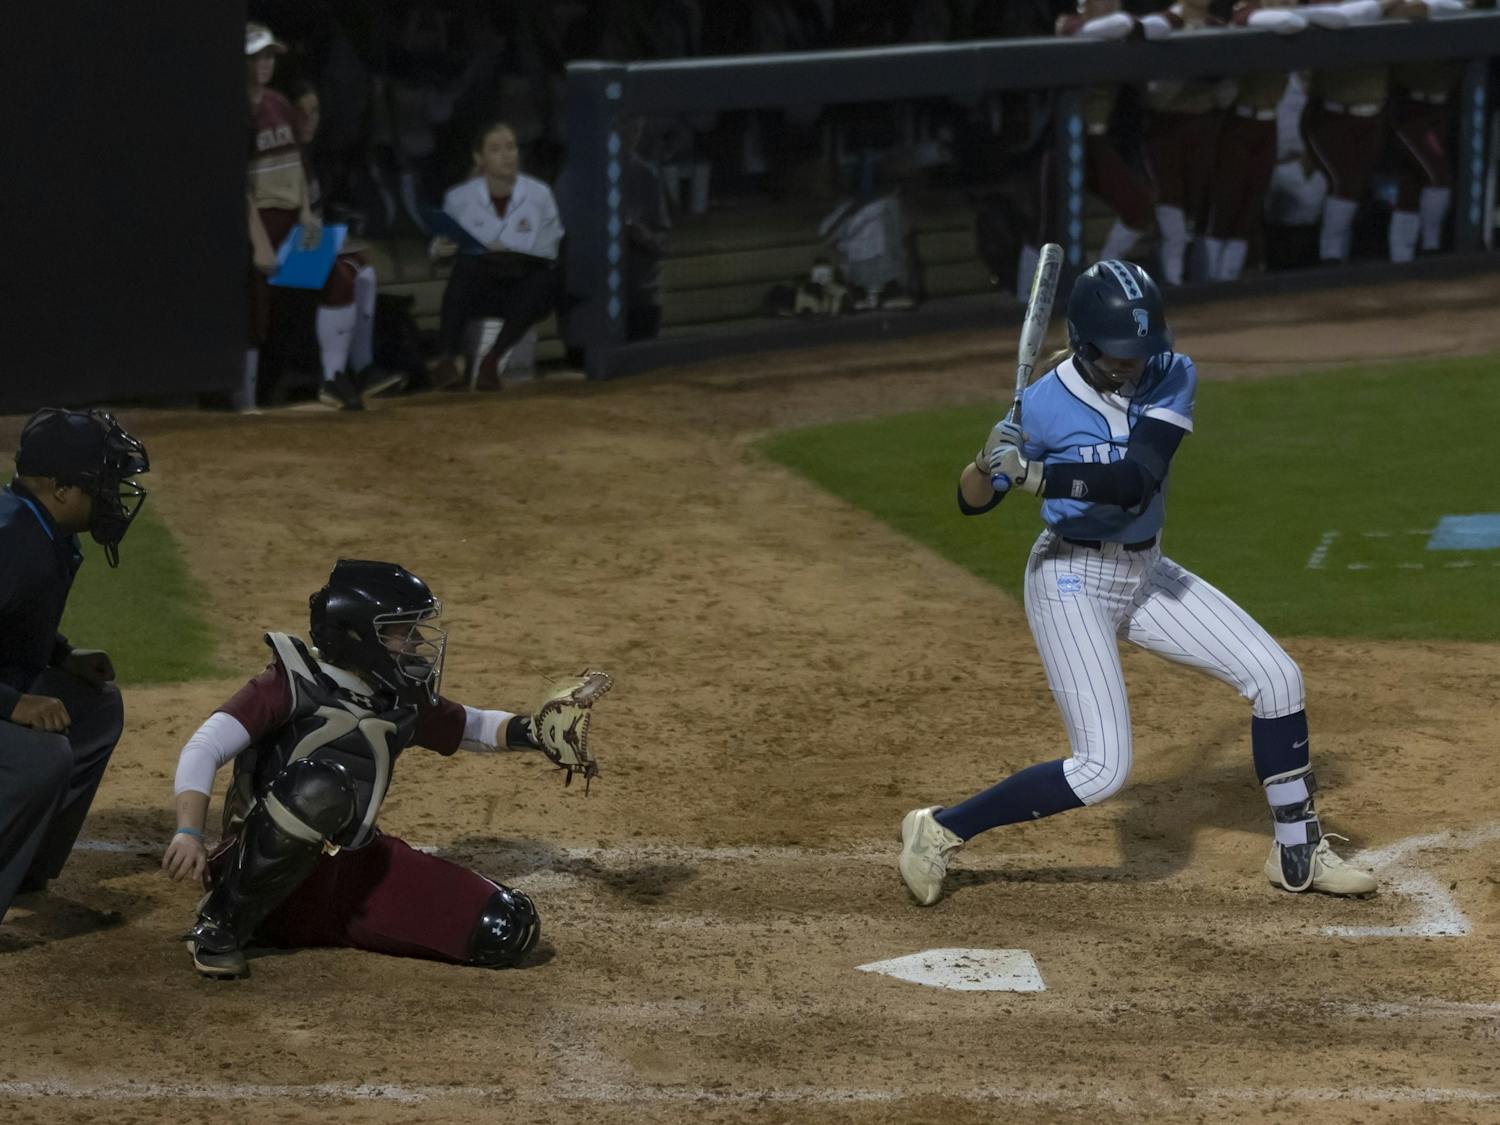 UNC redshirt junior Kianna Jones (44) prepares to hit the ball during a home game against Elon University at Anderson Stadium on Wednesday, Feb. 15, 2023. UNC won to 9-5.